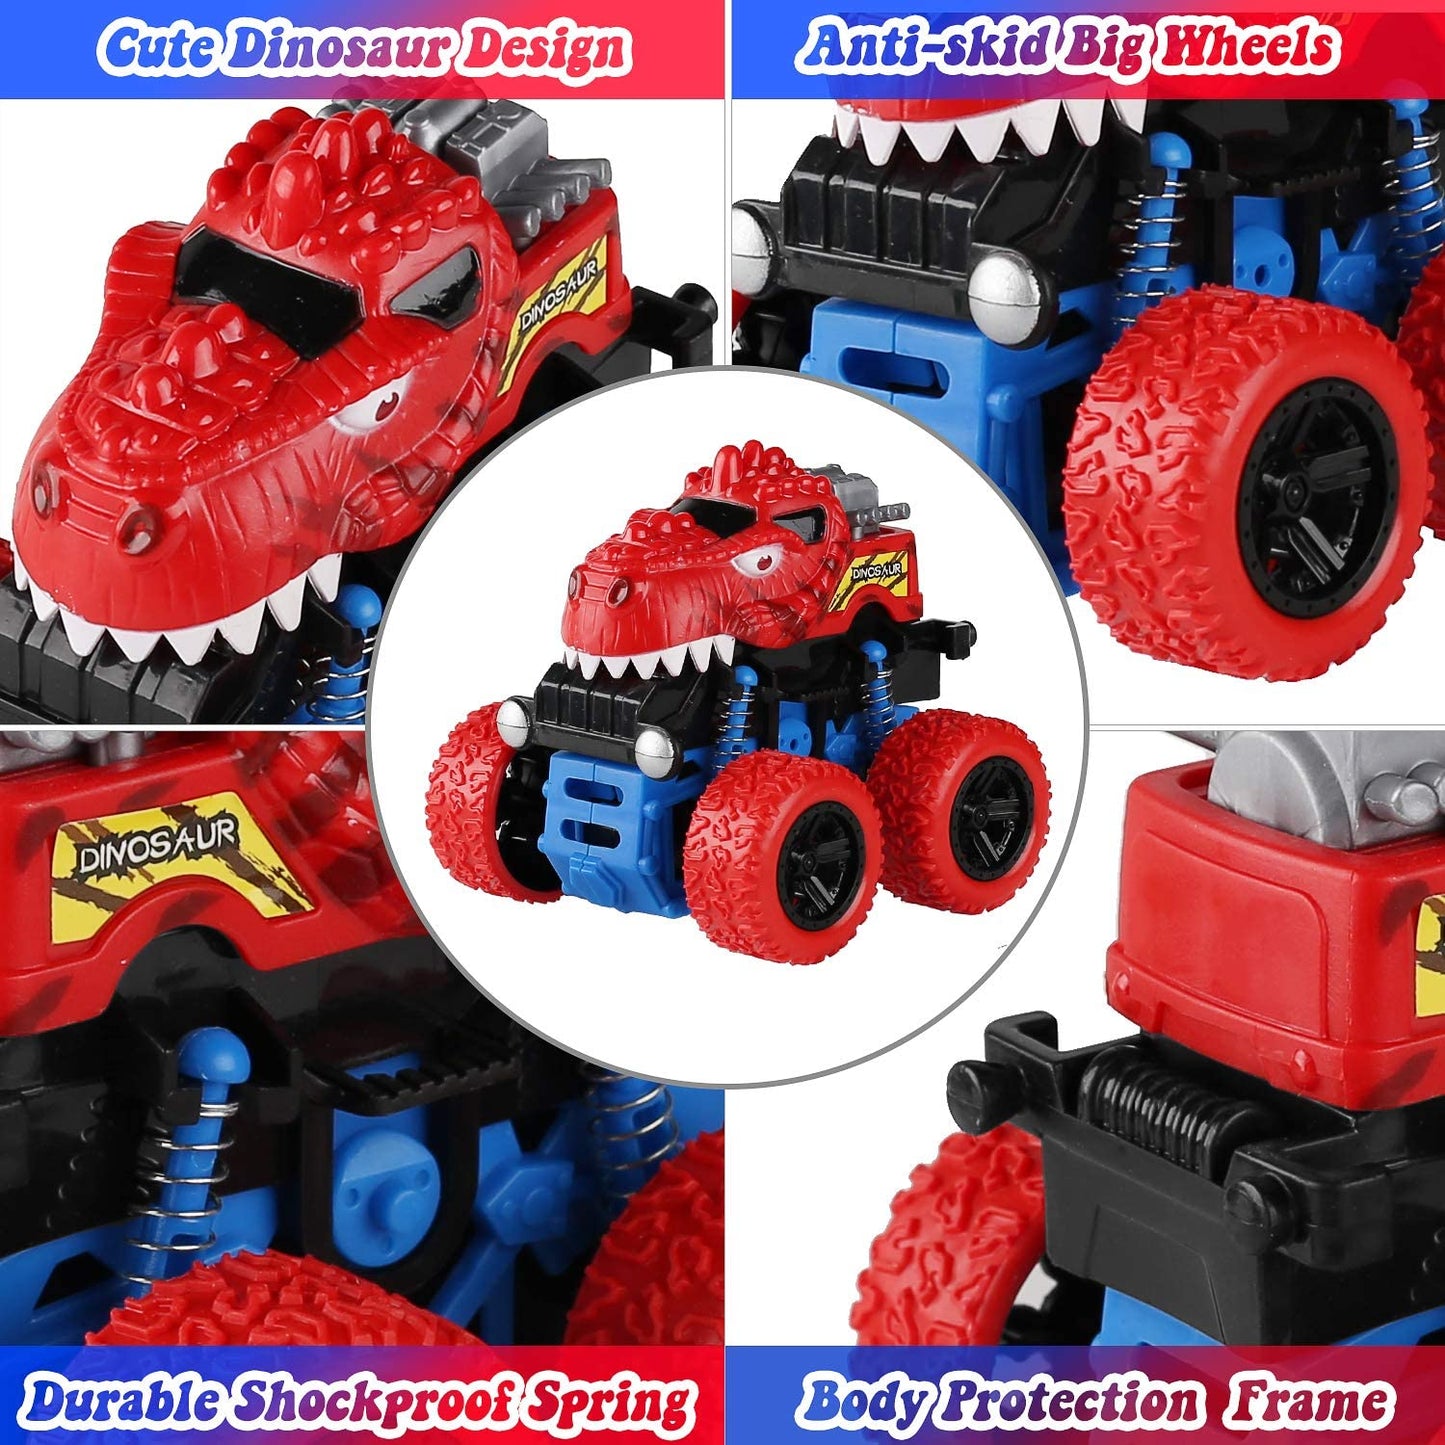 Dinosaur Toys Cars for Boys - 4 Pack Friction Powered Push and Go Monster Trucks Pull Back Vehicles for Kids Ages 3 4 5 6 7 Year Old - Christmas Birthday Gift Dino Toys for Toddlers